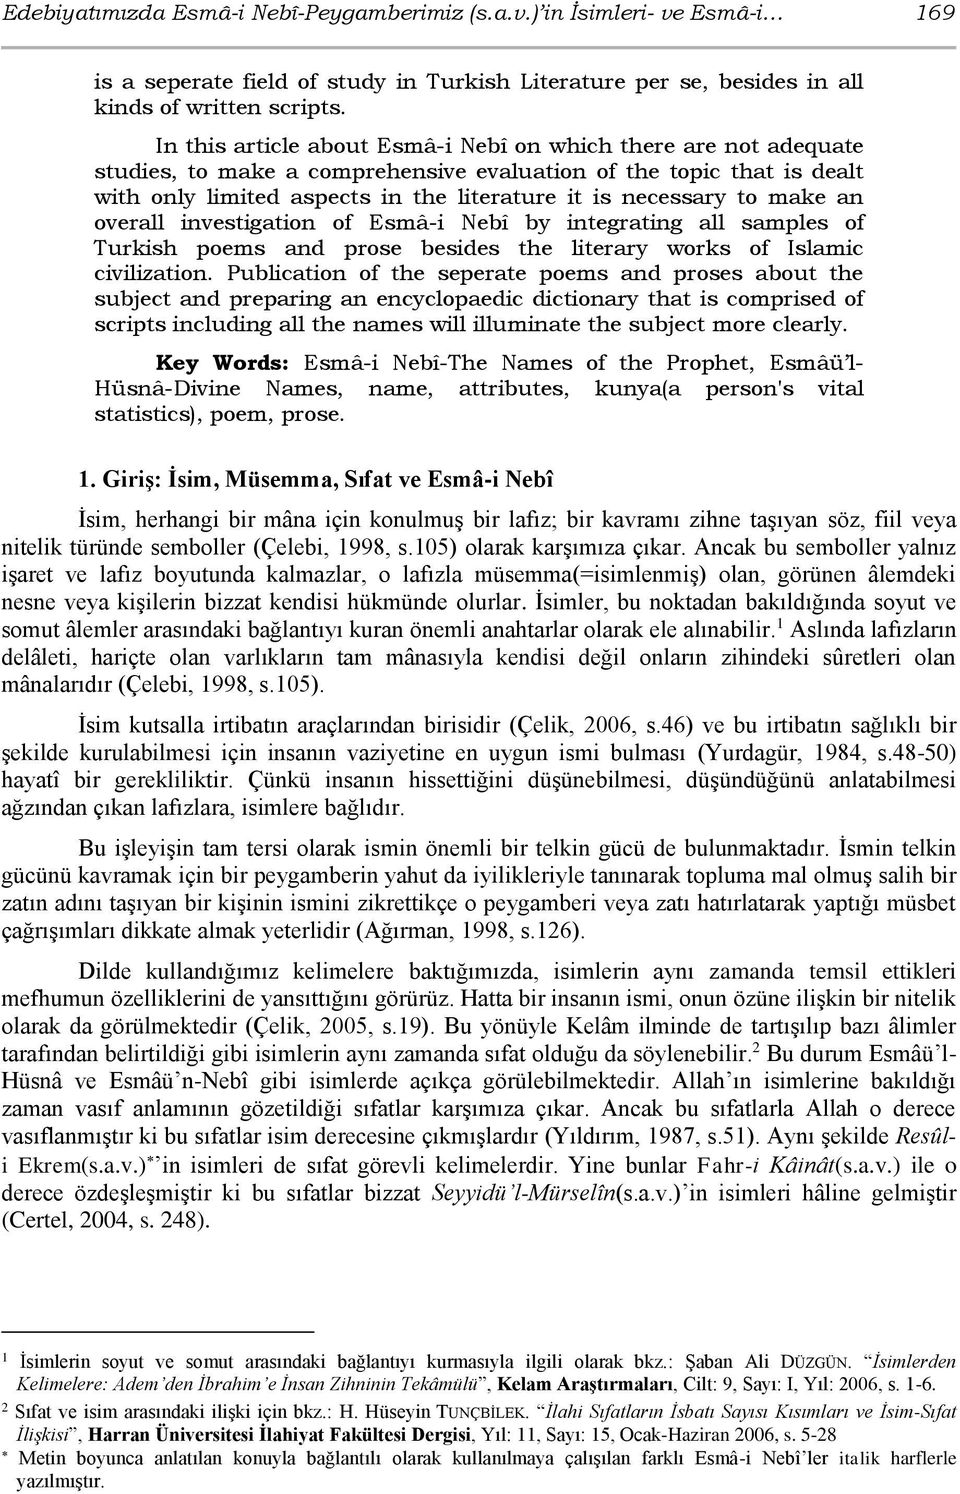 make an overall investigation of Esmâ-i Nebî by integrating all samples of Turkish poems and prose besides the literary works of Islamic civilization.